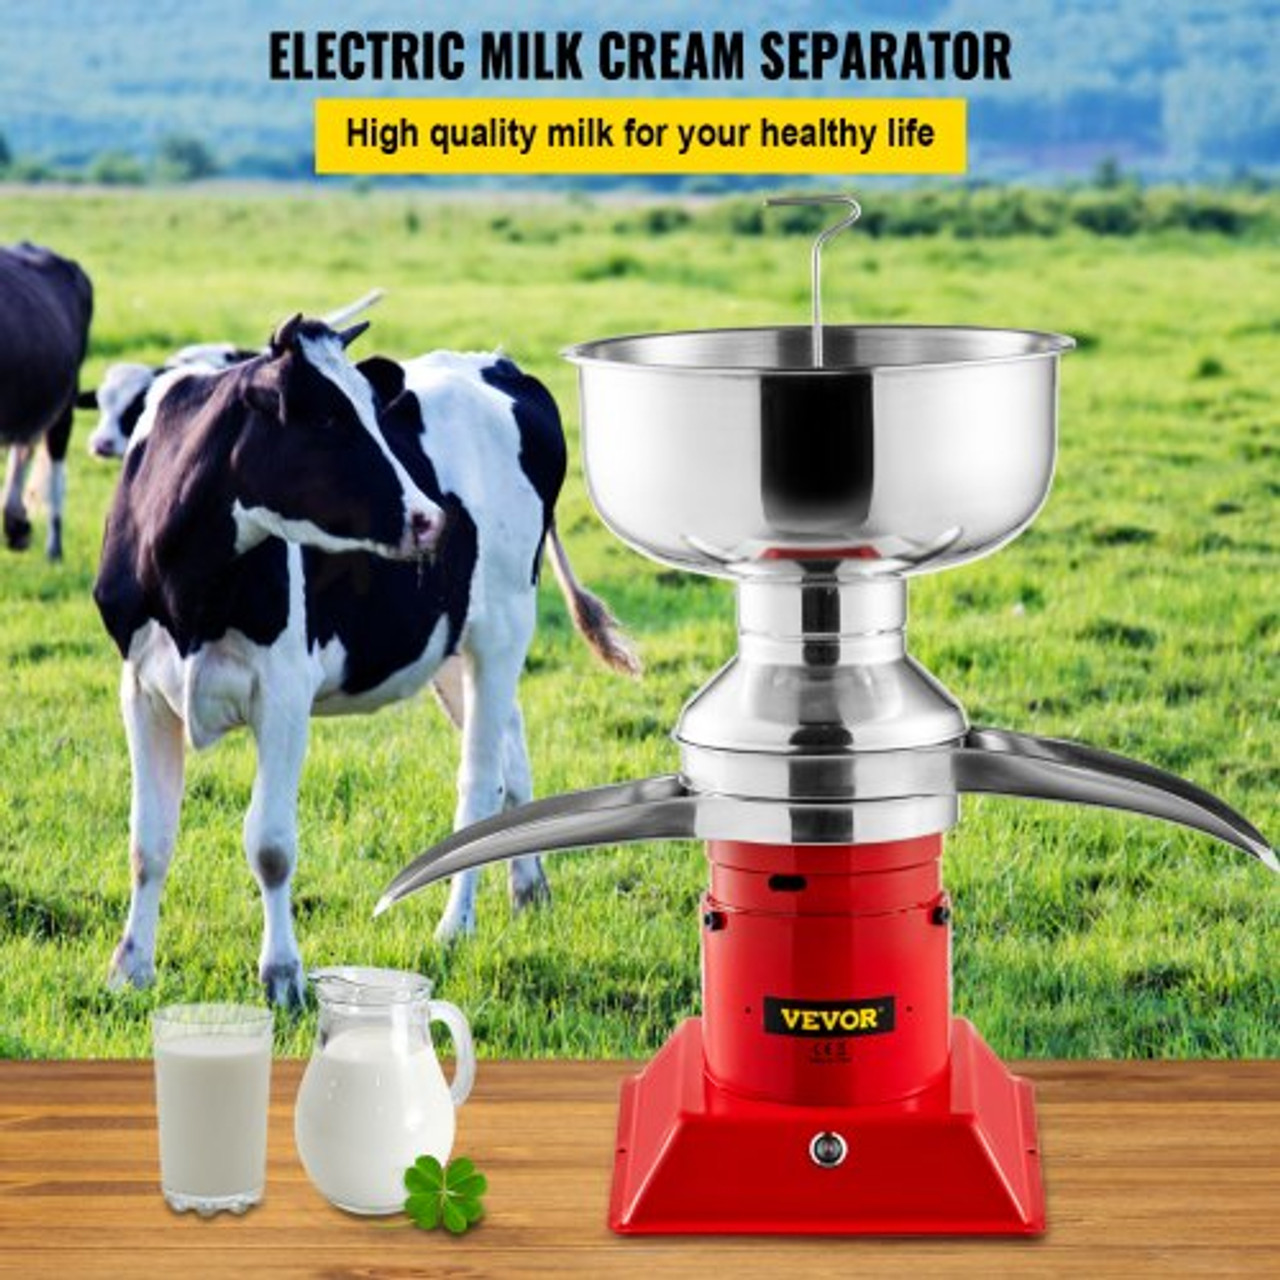 Milk Cream Separator, 100L/h Output Cream Centrifugal Separator, 304 Stainless Steel Milk Skimmer with 5L Bowl Capacity, 10500RPM Rotating Speed Cream Separator, Perfect for Dairy Farm Family